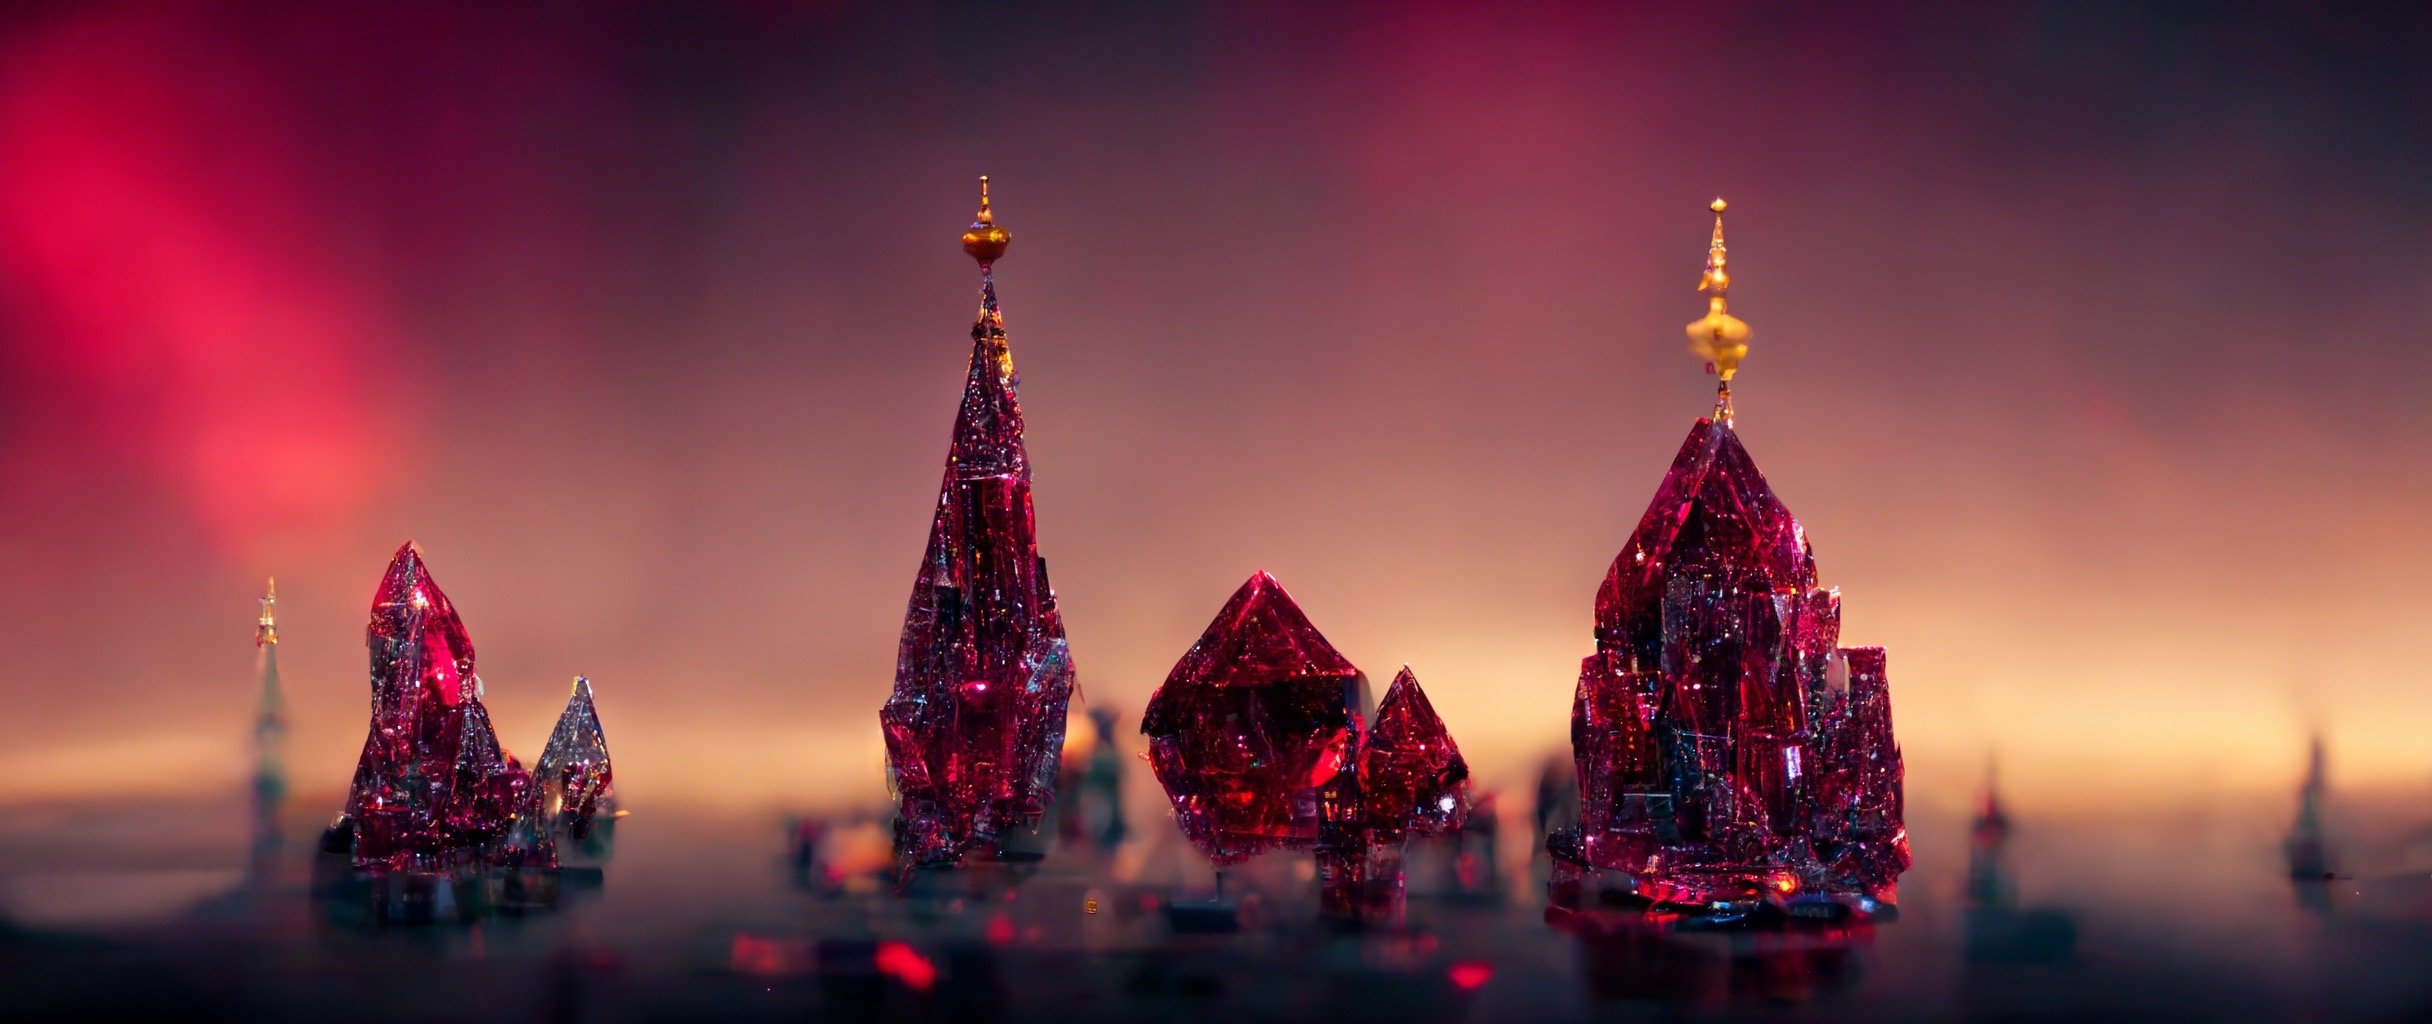 76ee2a55-e590-4468-8b08-6732e859a422_S3RAPH_Distant_view_of_a_magical_crystal_kingdom_made_up_of_ruby_and_emerald_towers_with_golden_intricate_d.JPG